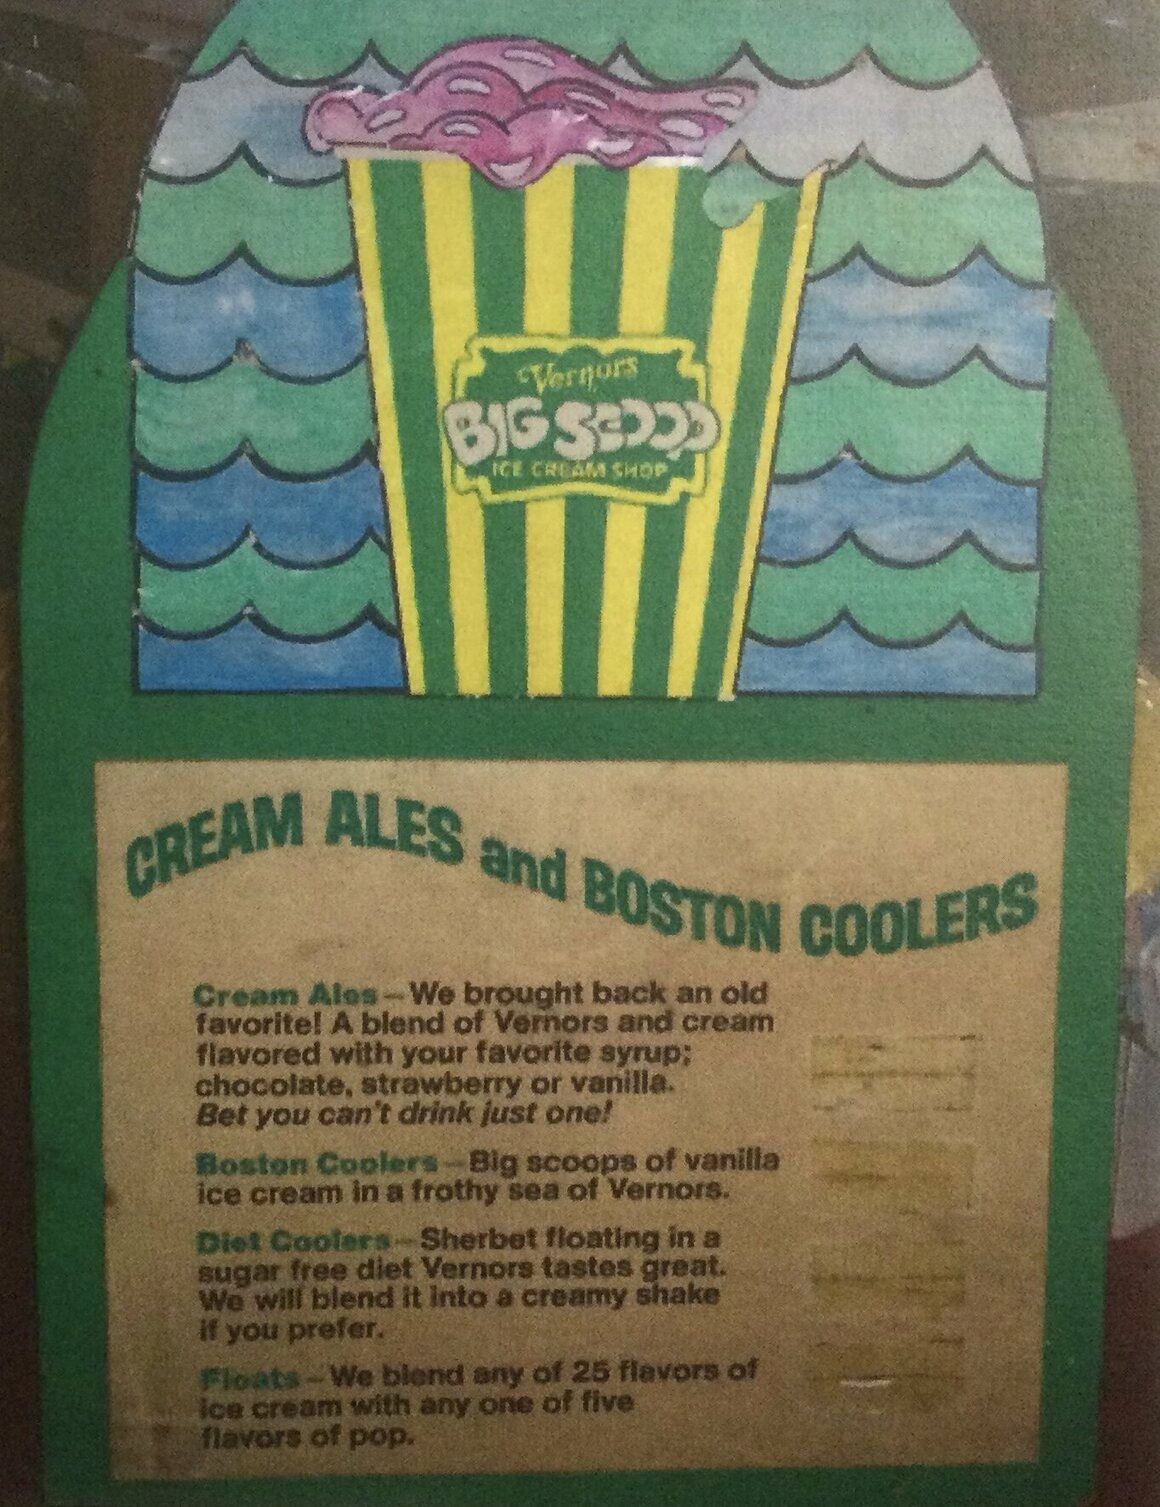 A menu from a Vernors Big Scoop ice cream shop, offering a variety of treats, including the Boston Cooler. 